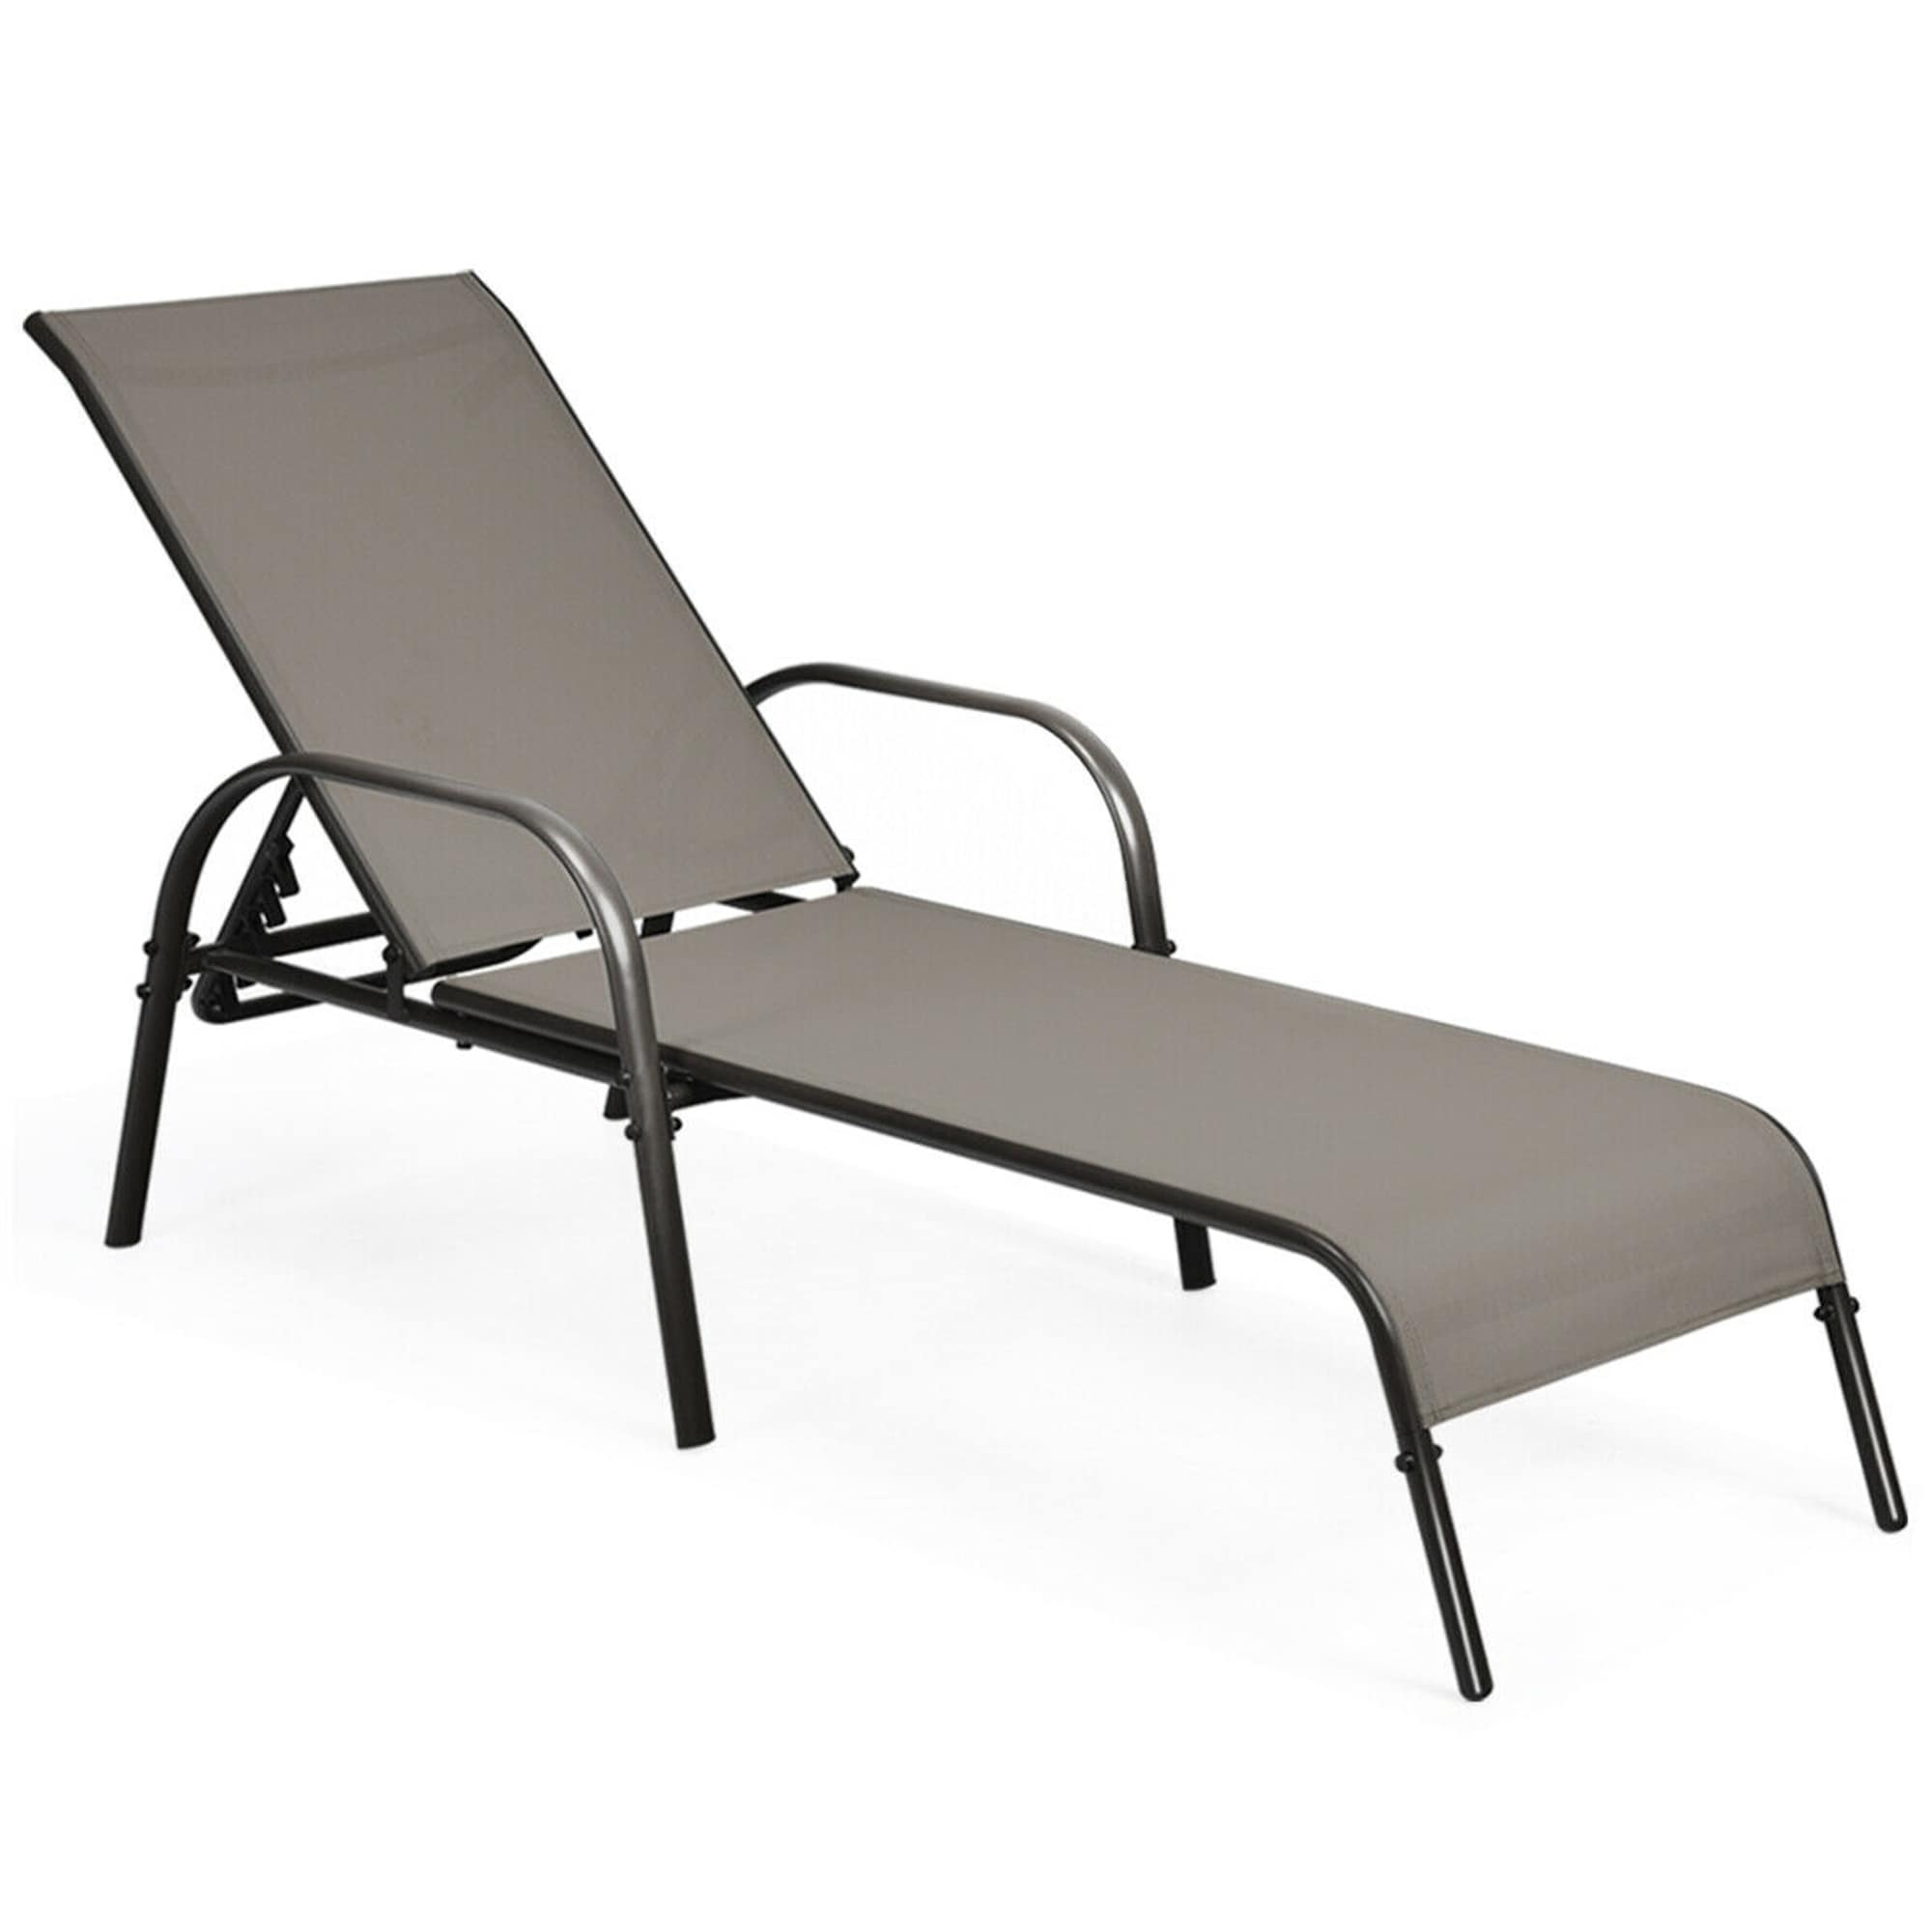 Adjustable Outdoor Backrest Metal Chaise Folding Lounge Chair